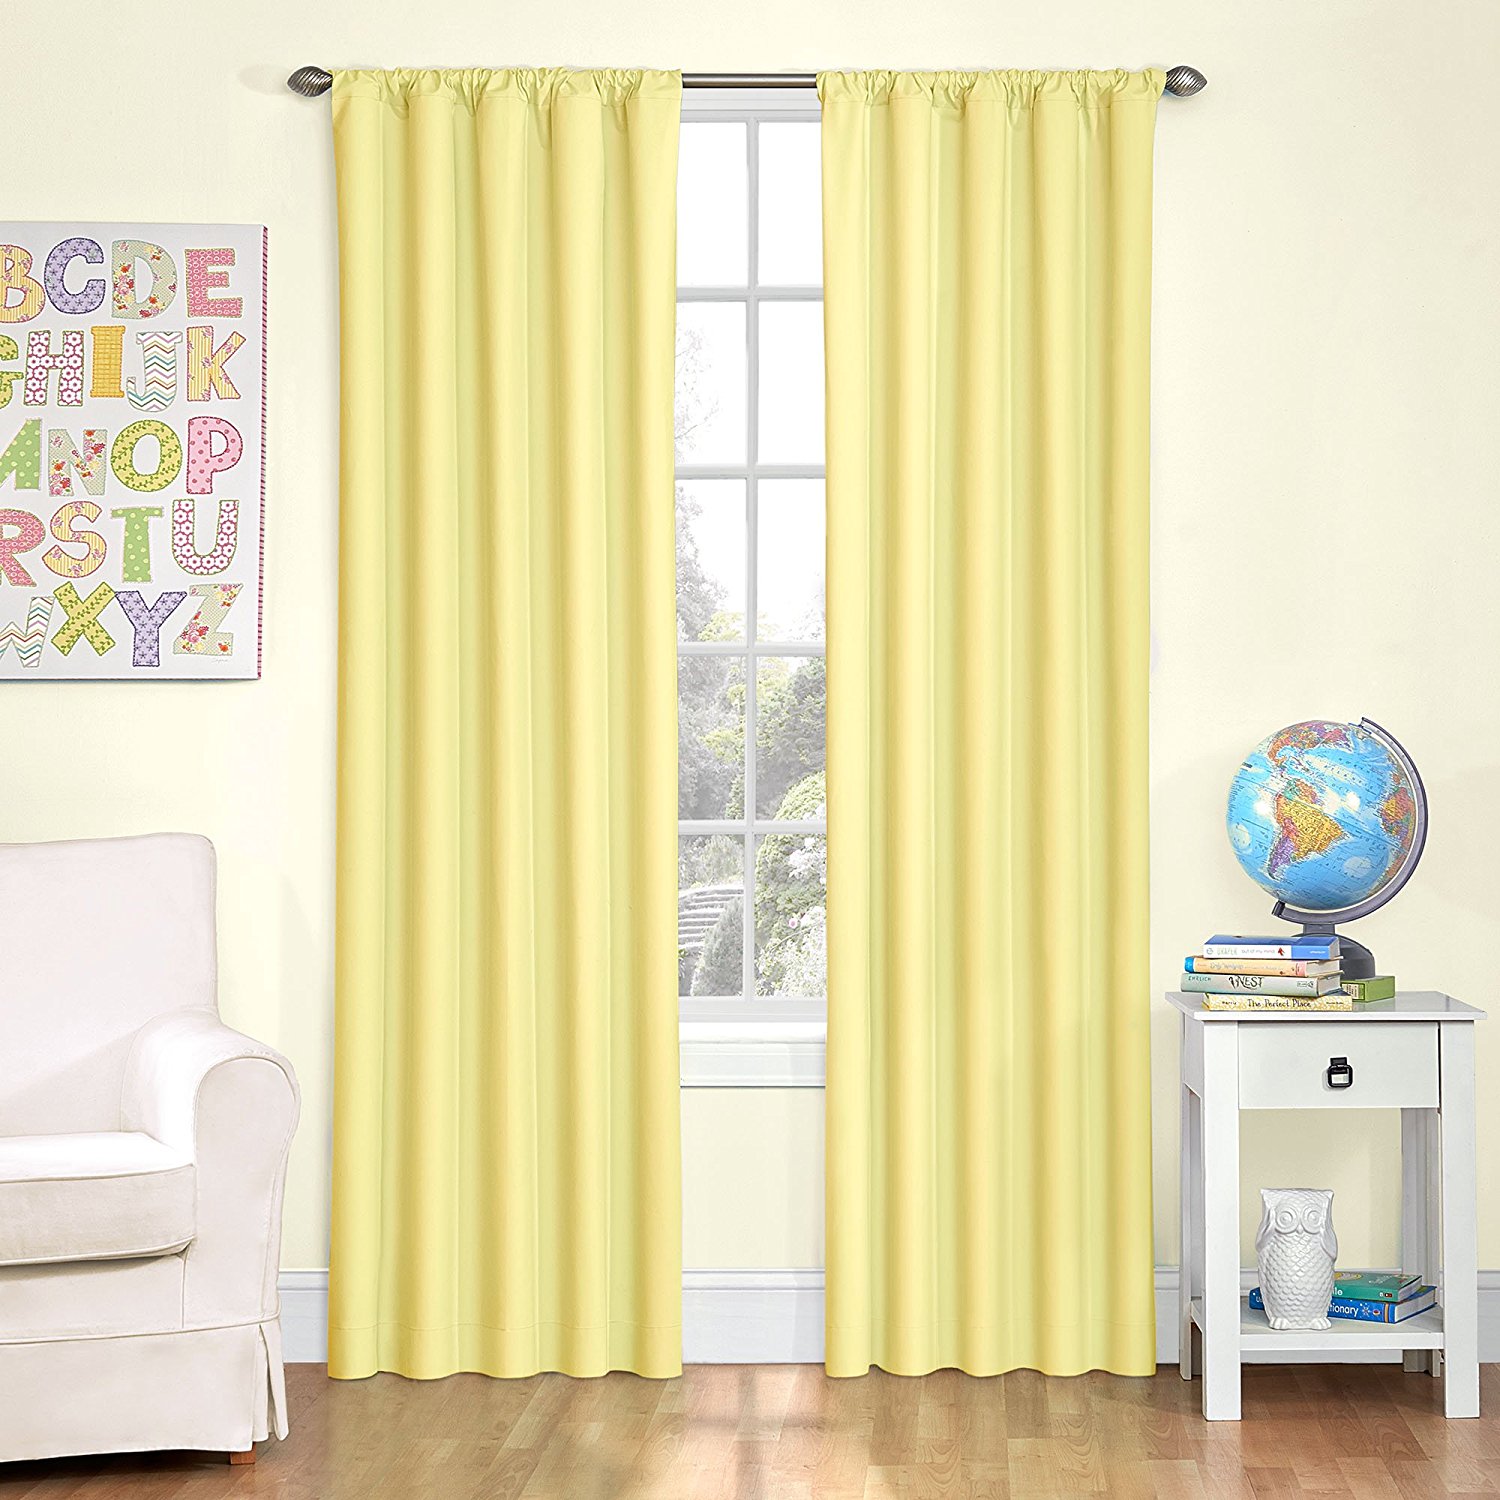 Download Free Photo Yellow Curtain Curtain Lines Stripes Free Download Jooinn PSD Mockup Templates